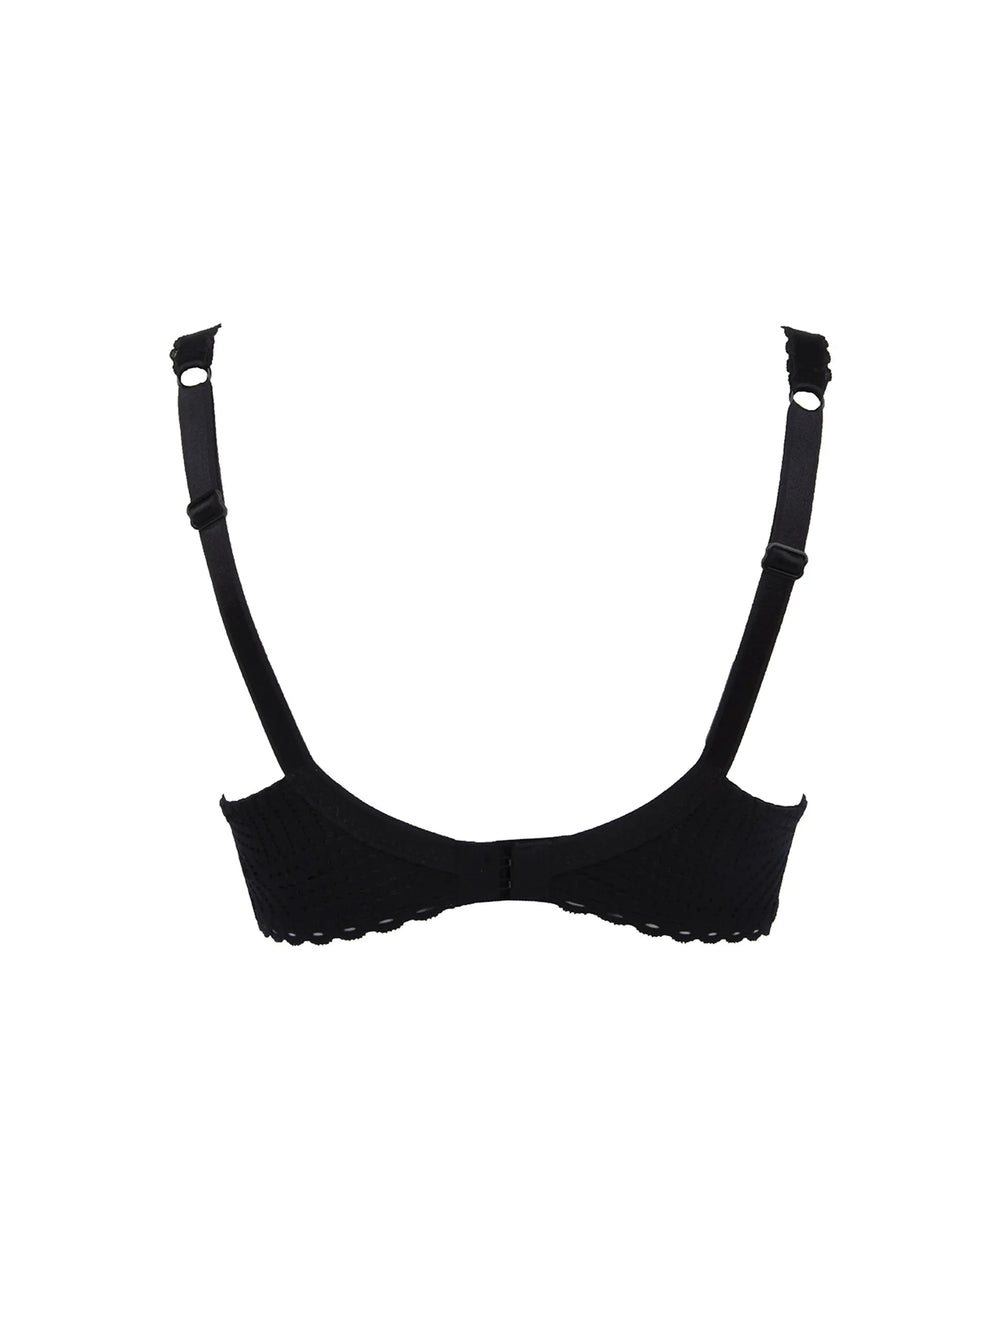 Antigel By Lise Charmel Tressage Graphic 3/4 Cup - Tressage Noir Full Cup Bra Antigel by Lise Charmel 